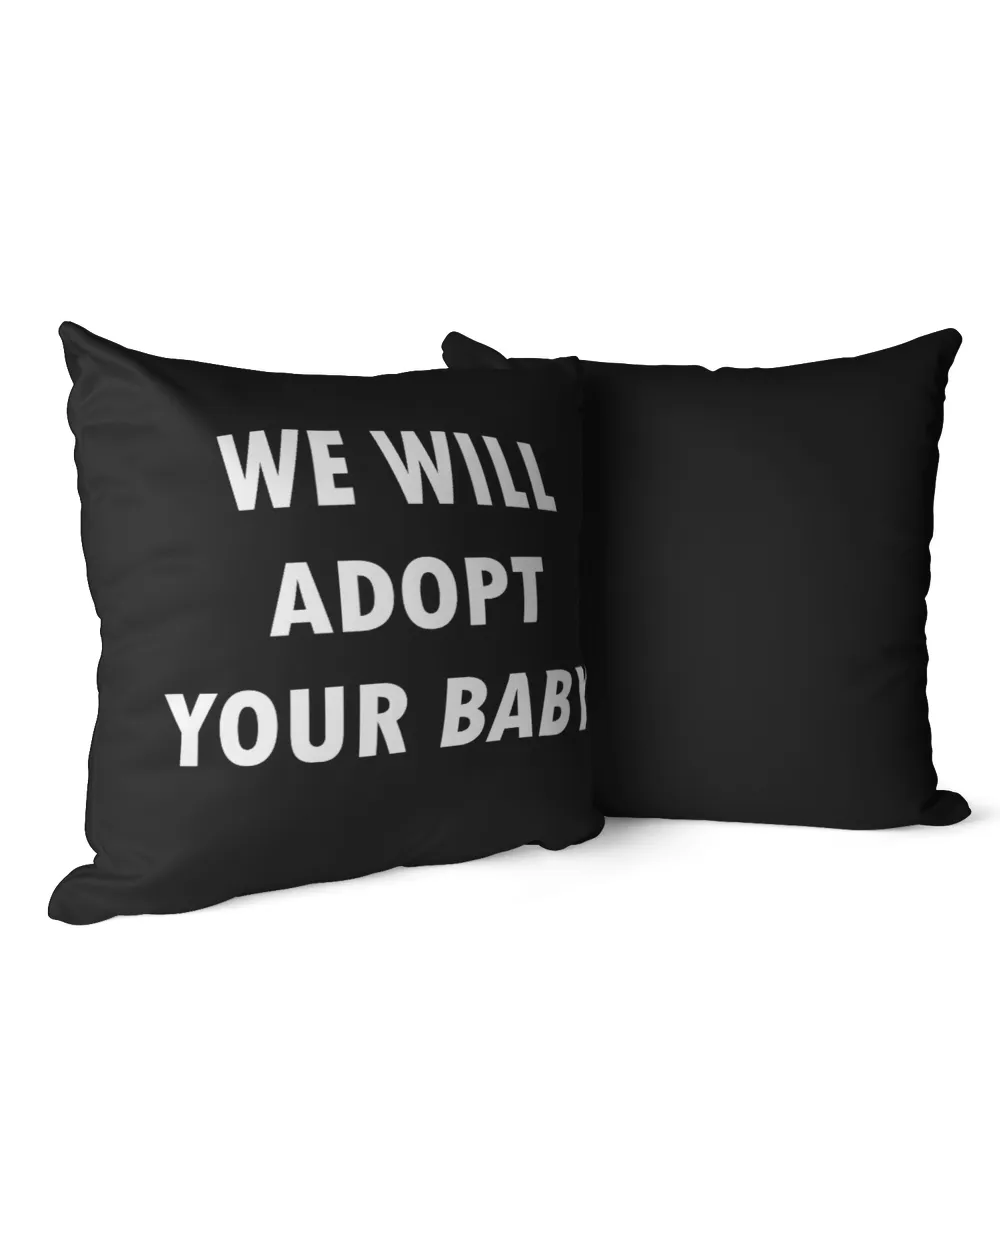 We Will Adopt Your Baby Sign Shirt